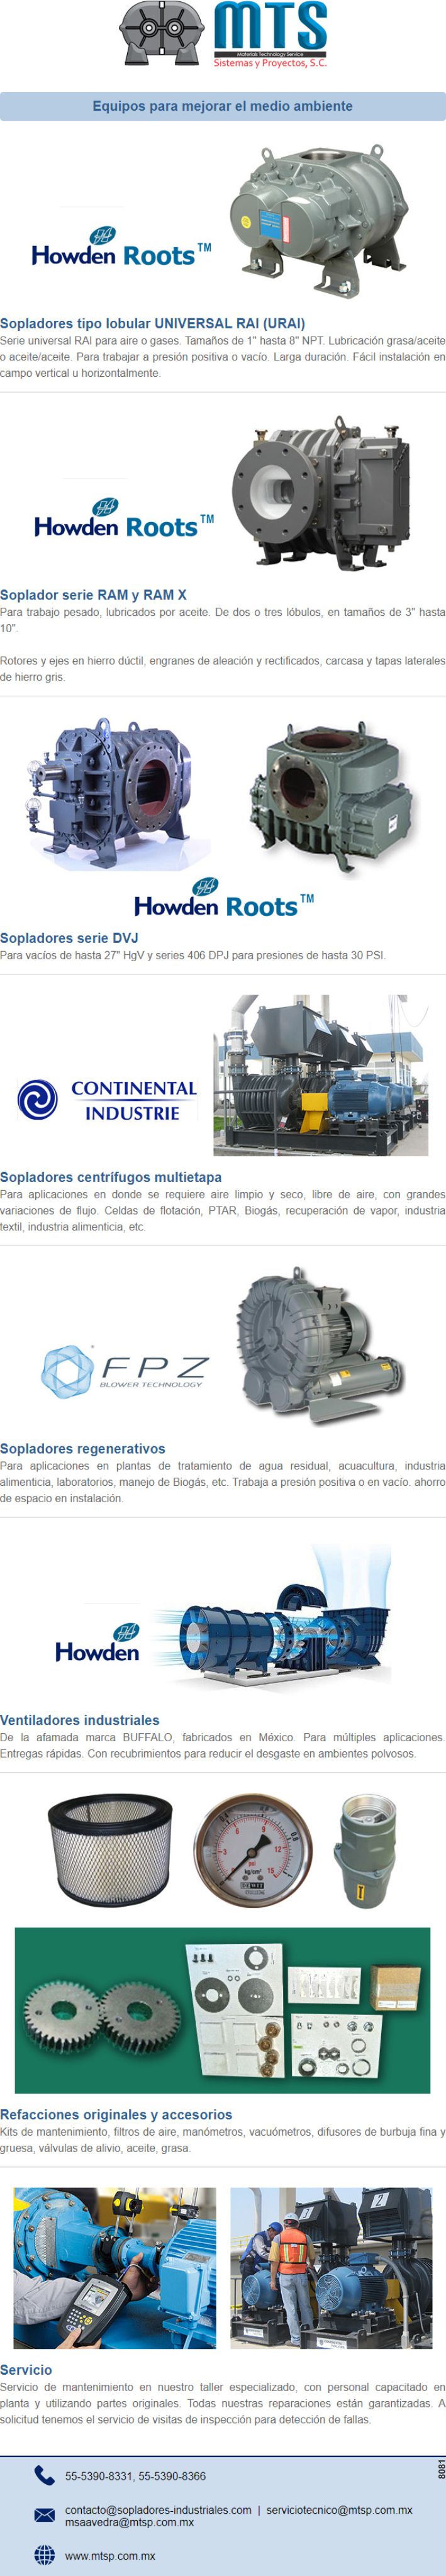 Industrial Blowers Howden Roots - Lobe type blowers - Industrial fans - Multistage centrifugal blowers - Regenerative blowers Original SPARE PARTS and Accessories. Maintenance service.